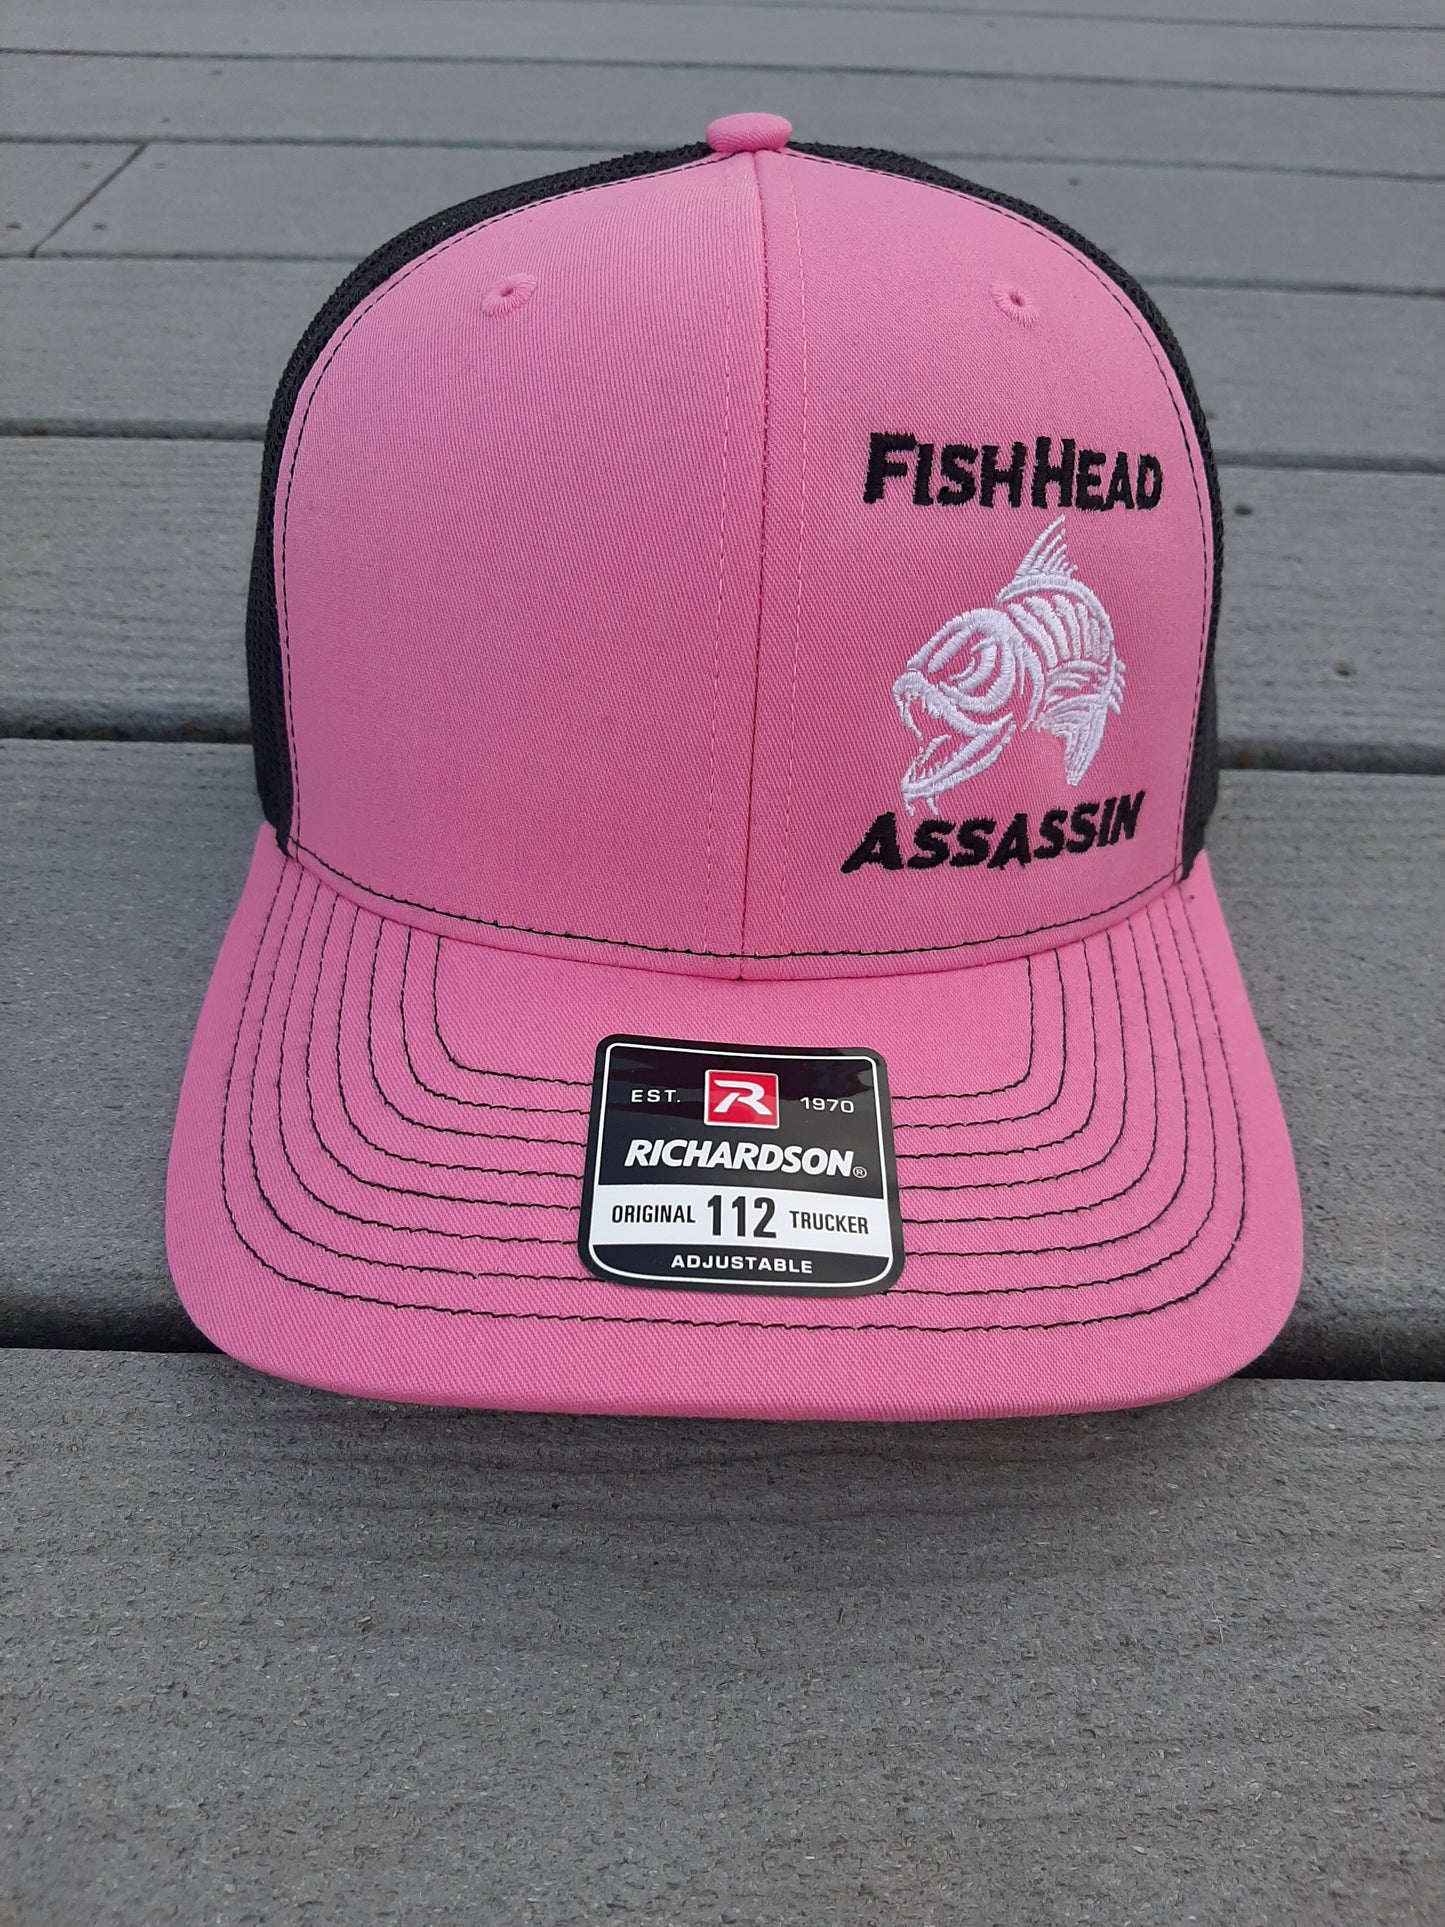 Hot Pink and Black Trucker Snapback Hat